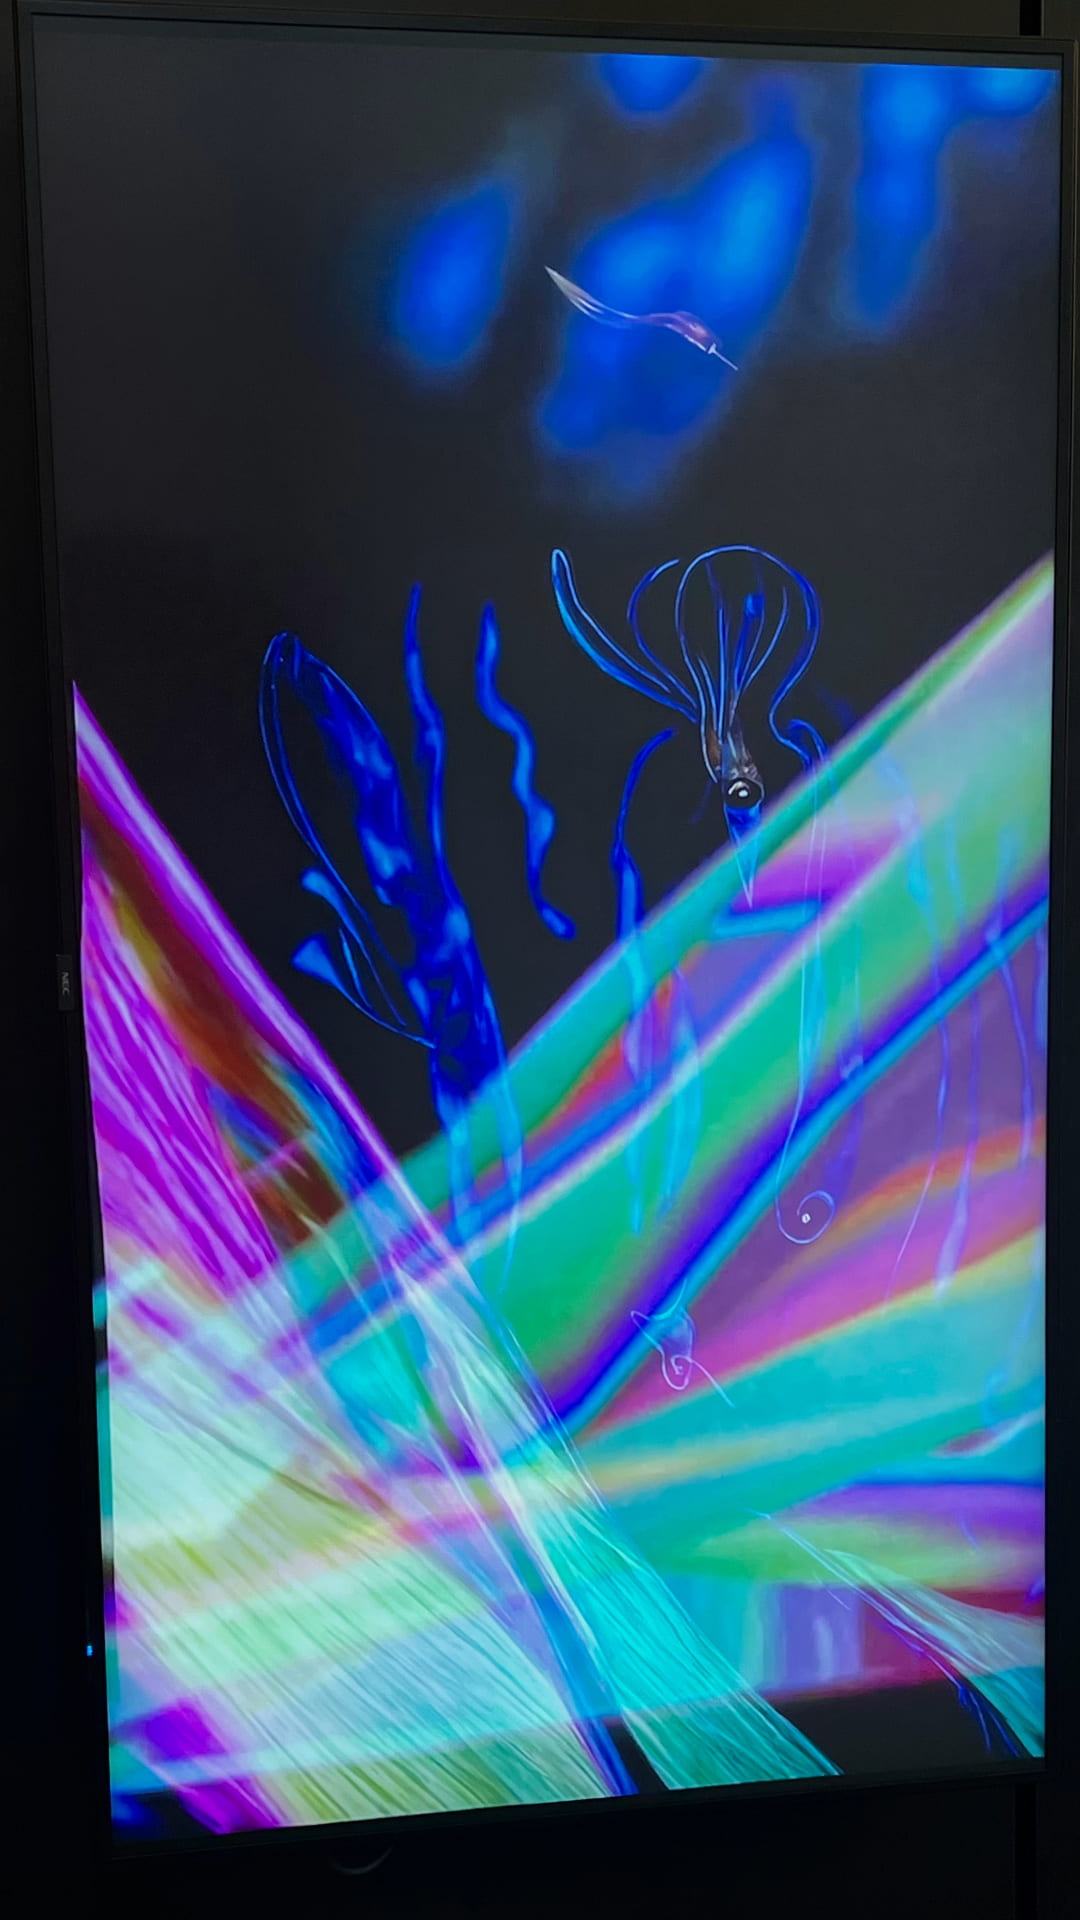 Photograph of an LED screen displaying a video piece. The video shows lenticular colour shifting plankton and squid, obscured by a semi-transparent rainbow shroud.